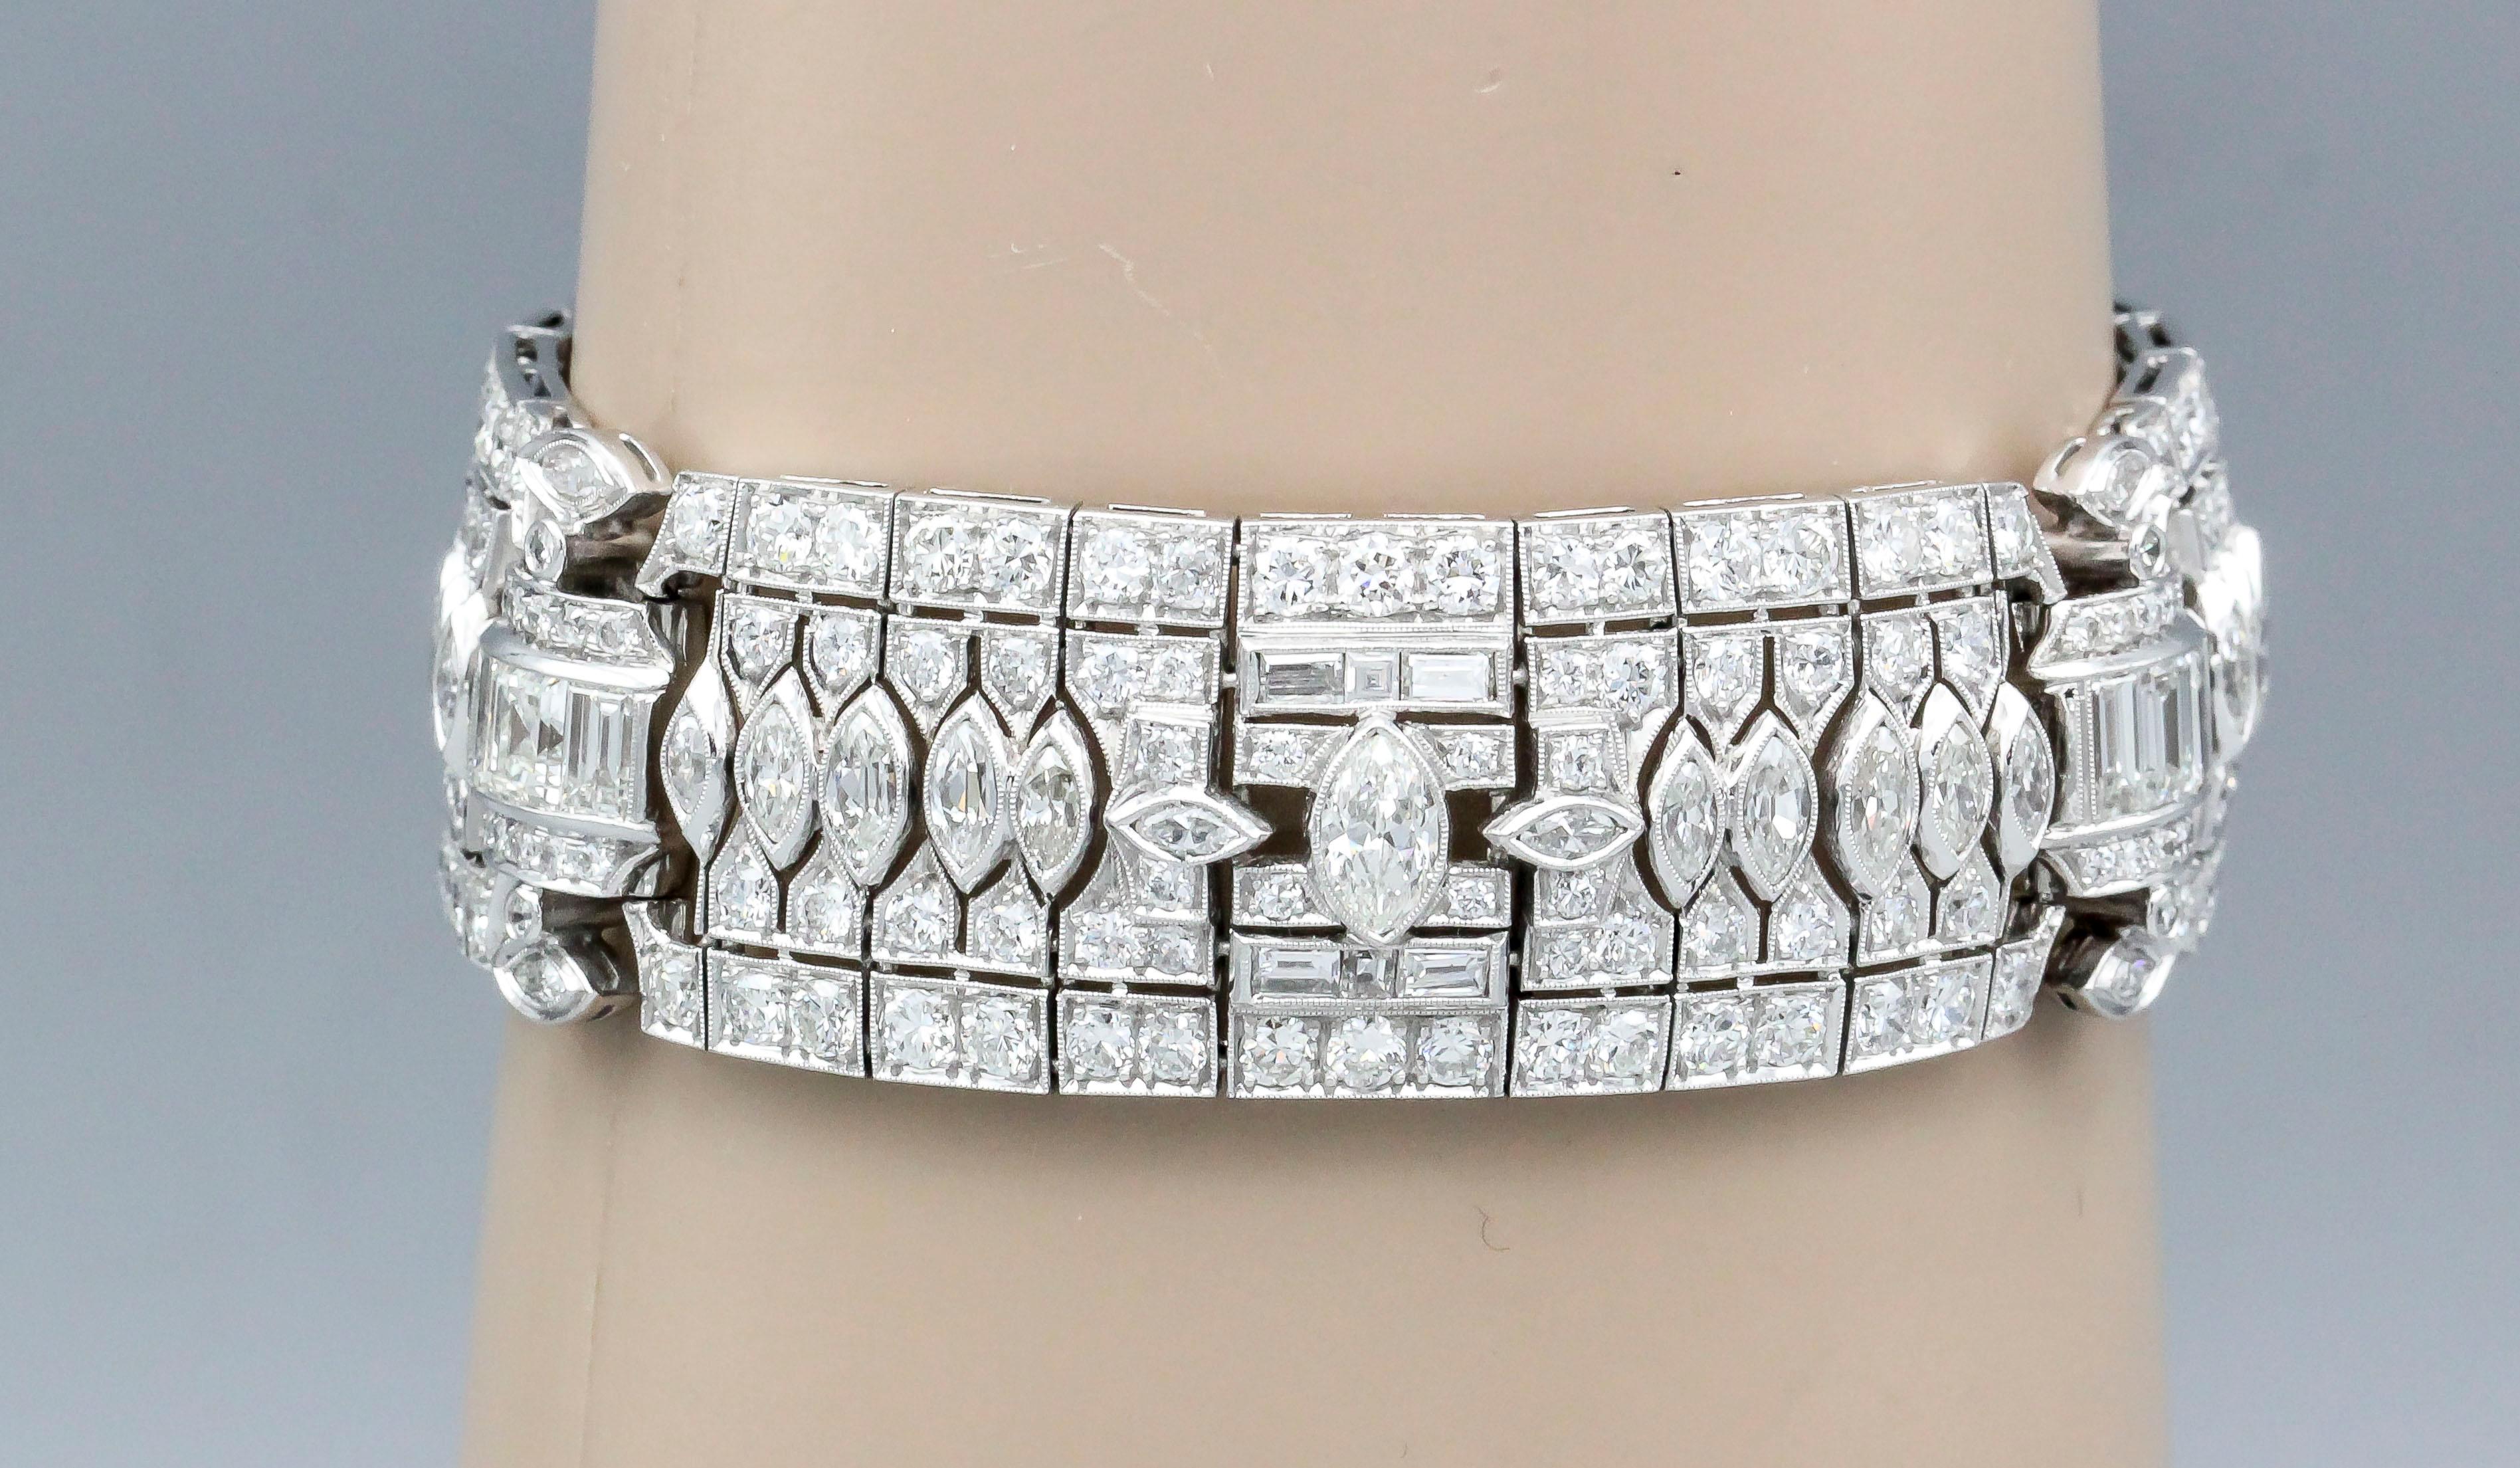 Very fine diamond and platinum bracelet by Tiffany & Co, circa 1930s. This exquisite piece features a varying number of very high grade diamond cuts: marquise cut, round brilliant cut, and baguette cut; total diamond weight approx. 25 carats.